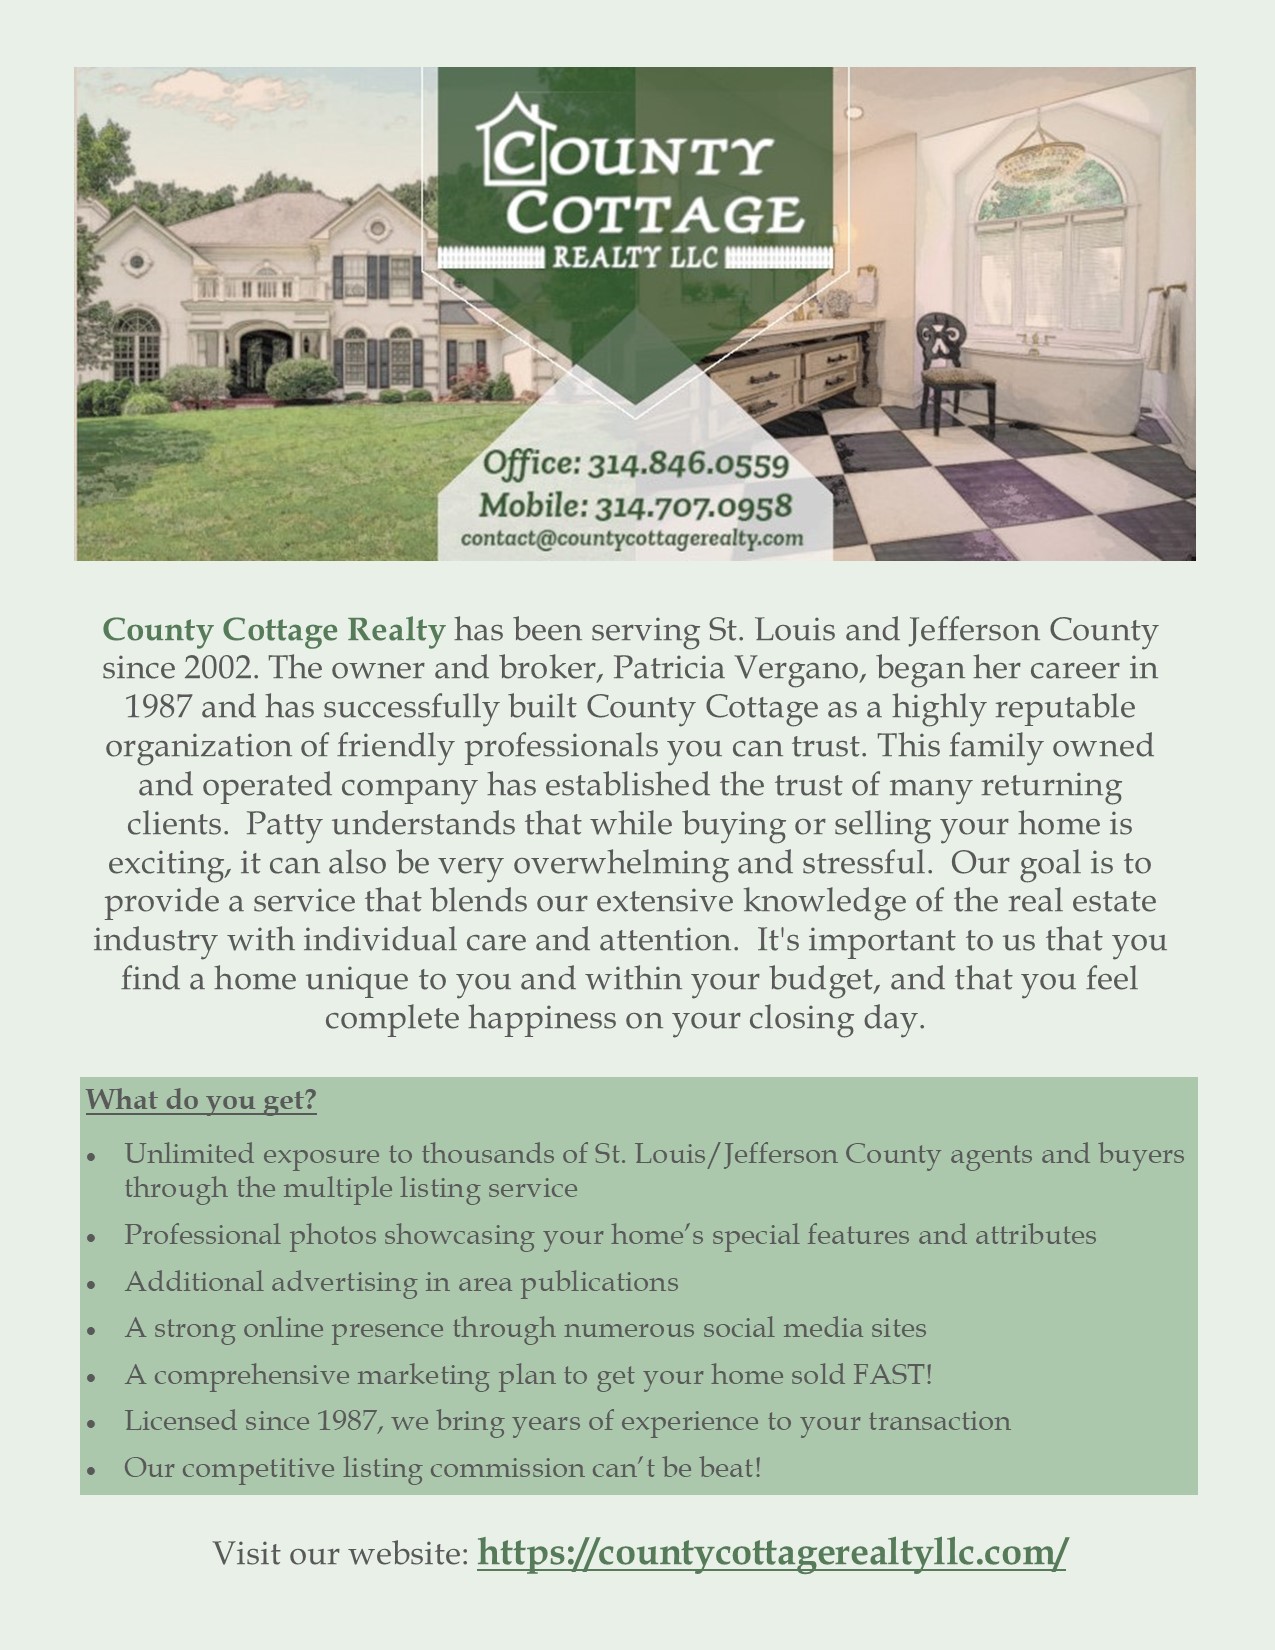 County Cottage Realty BIO